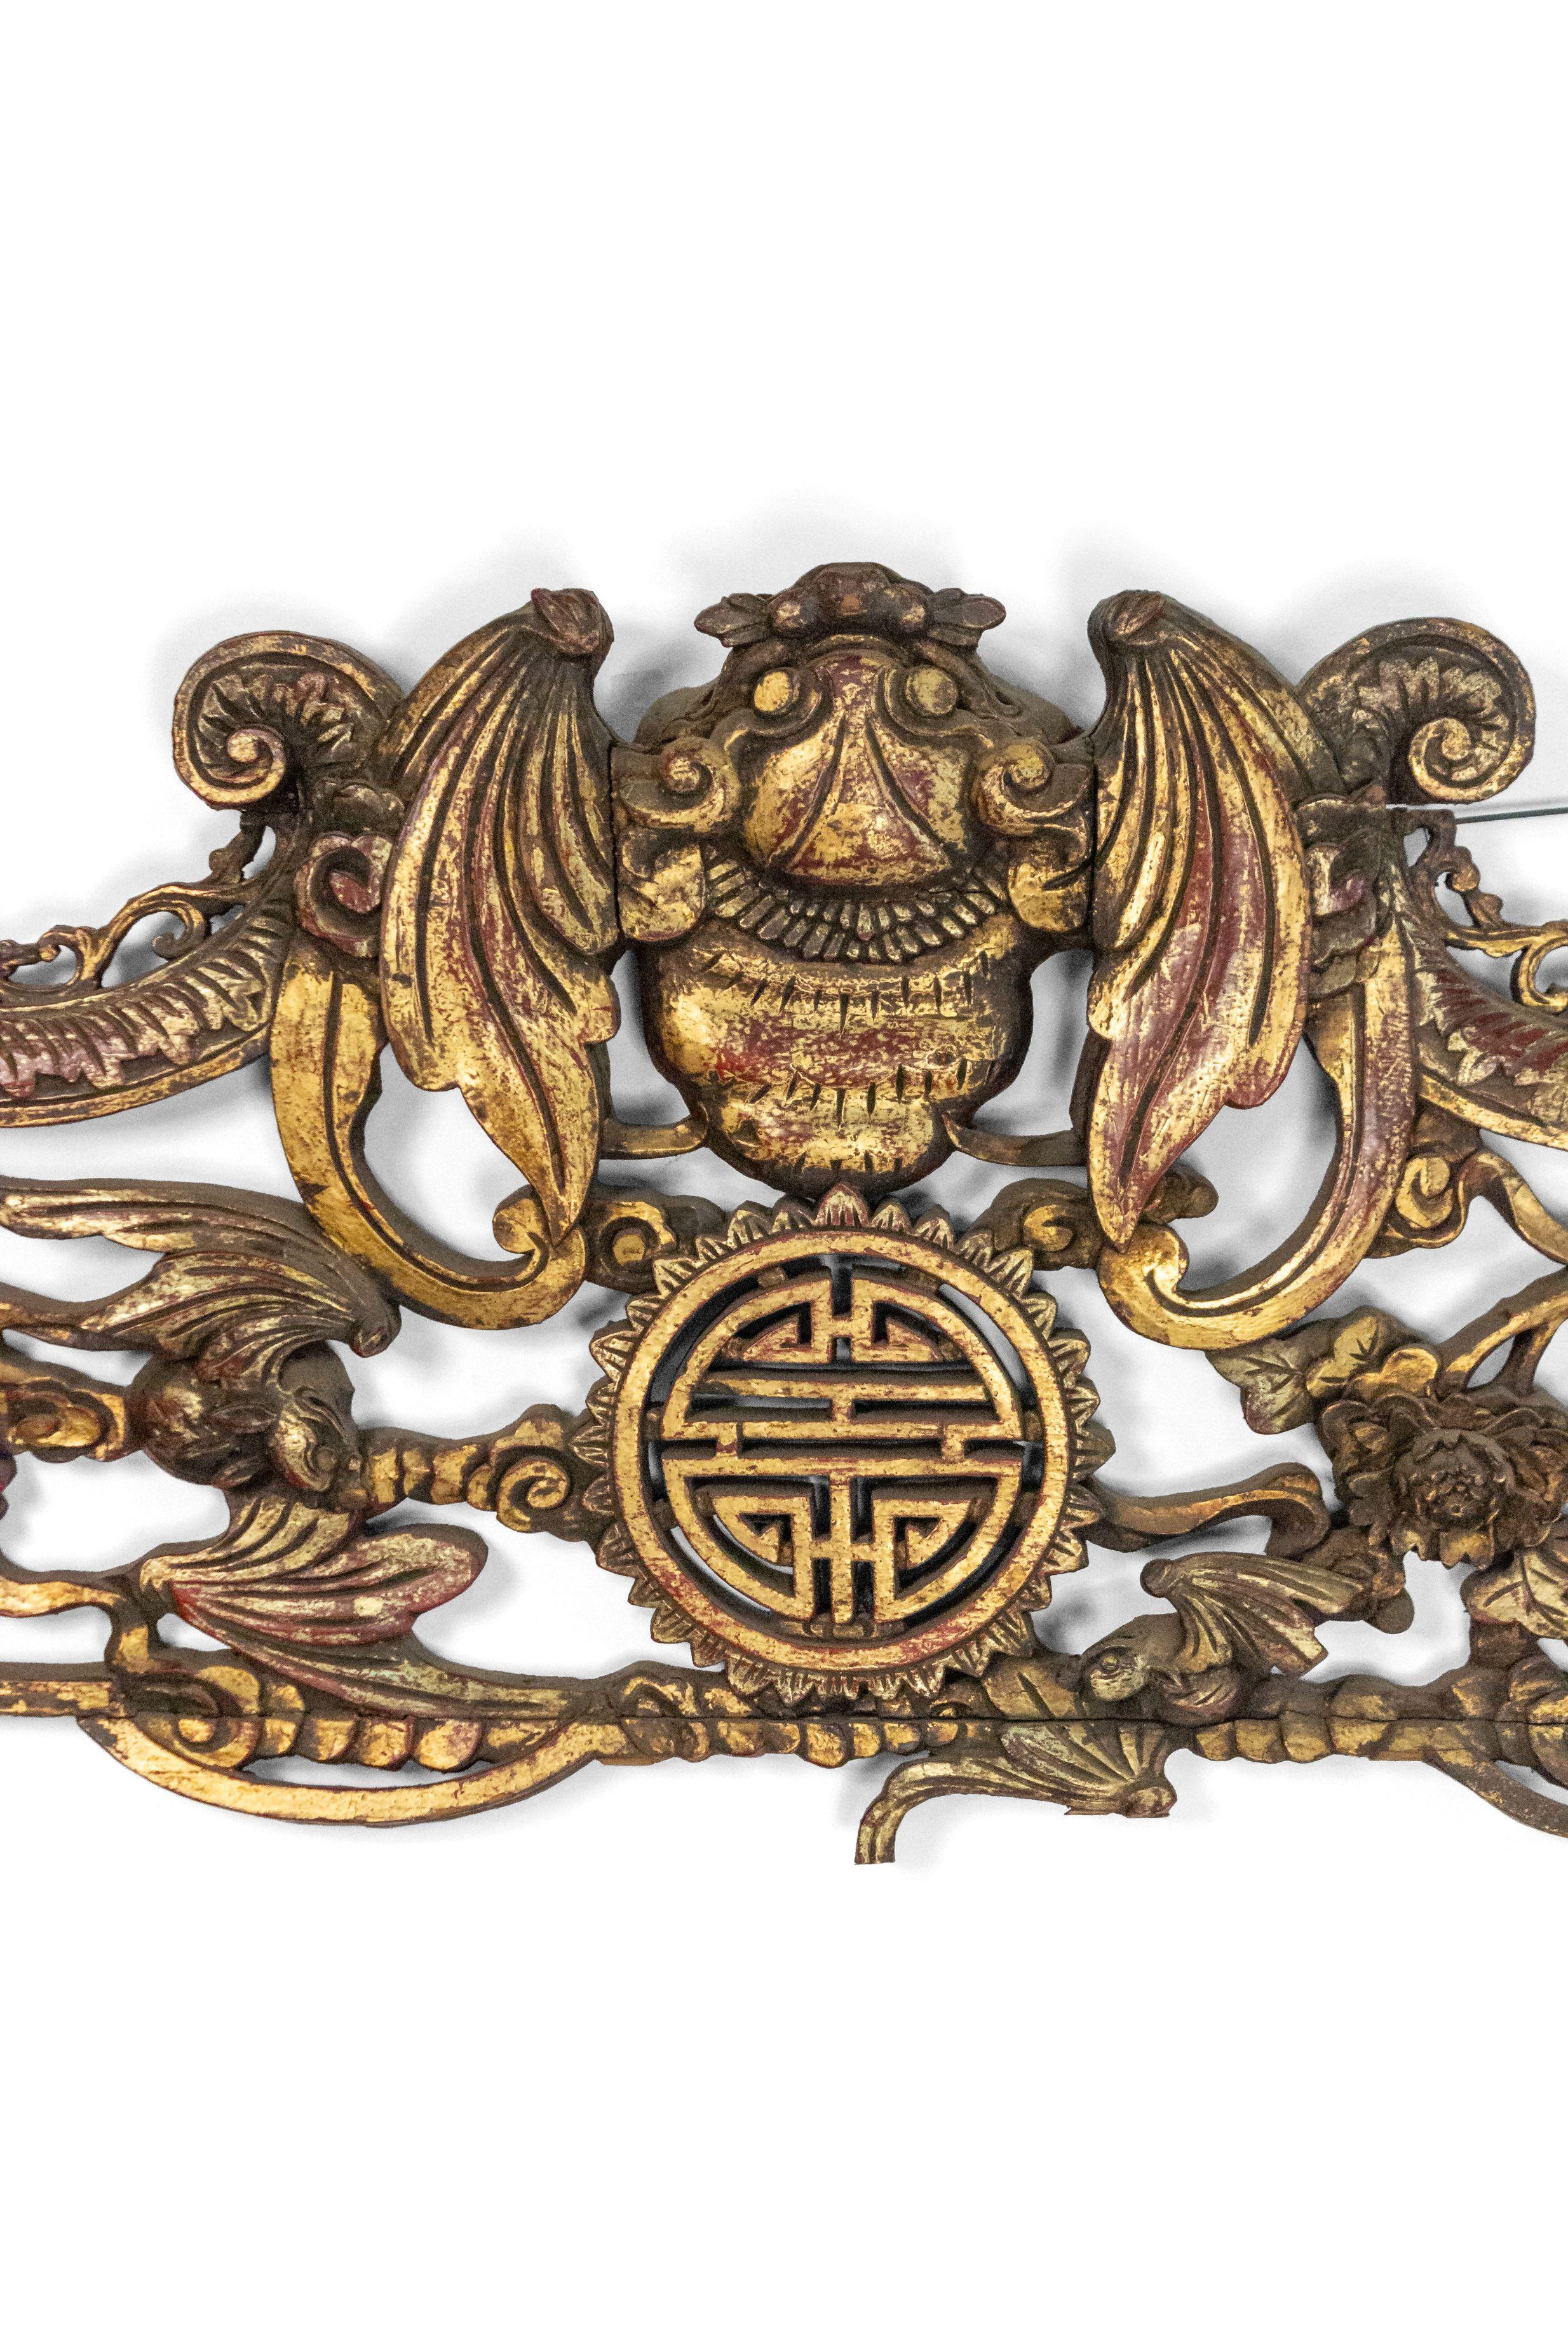 Asian Chinese style (19th century) red and gold painted filigree carved horizontal wall plaque.
 